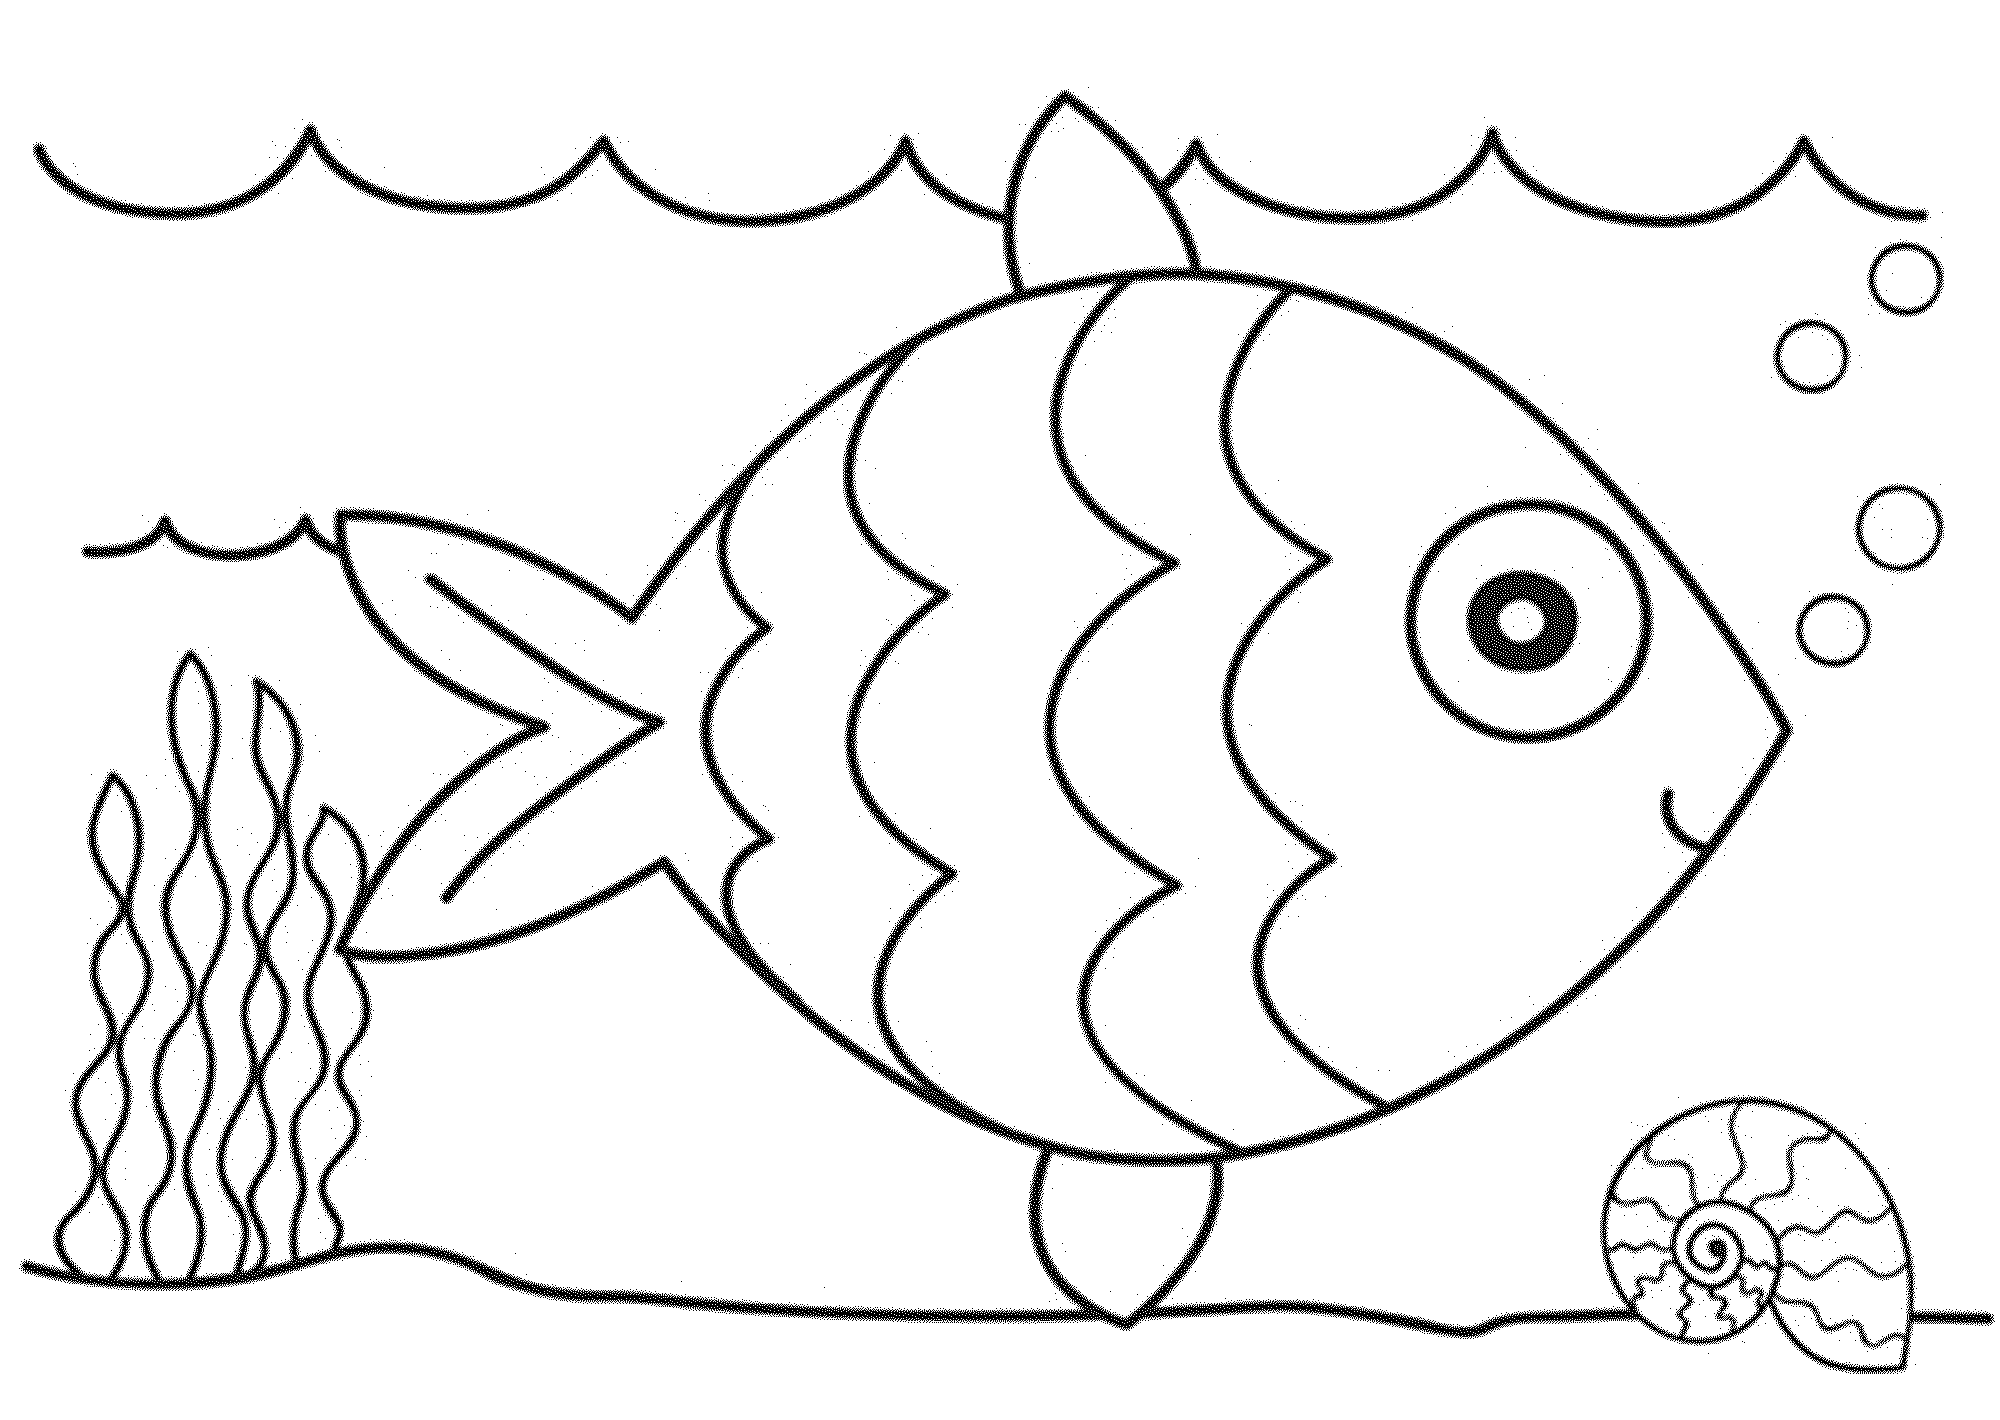 Printable toddler coloring pages pdf